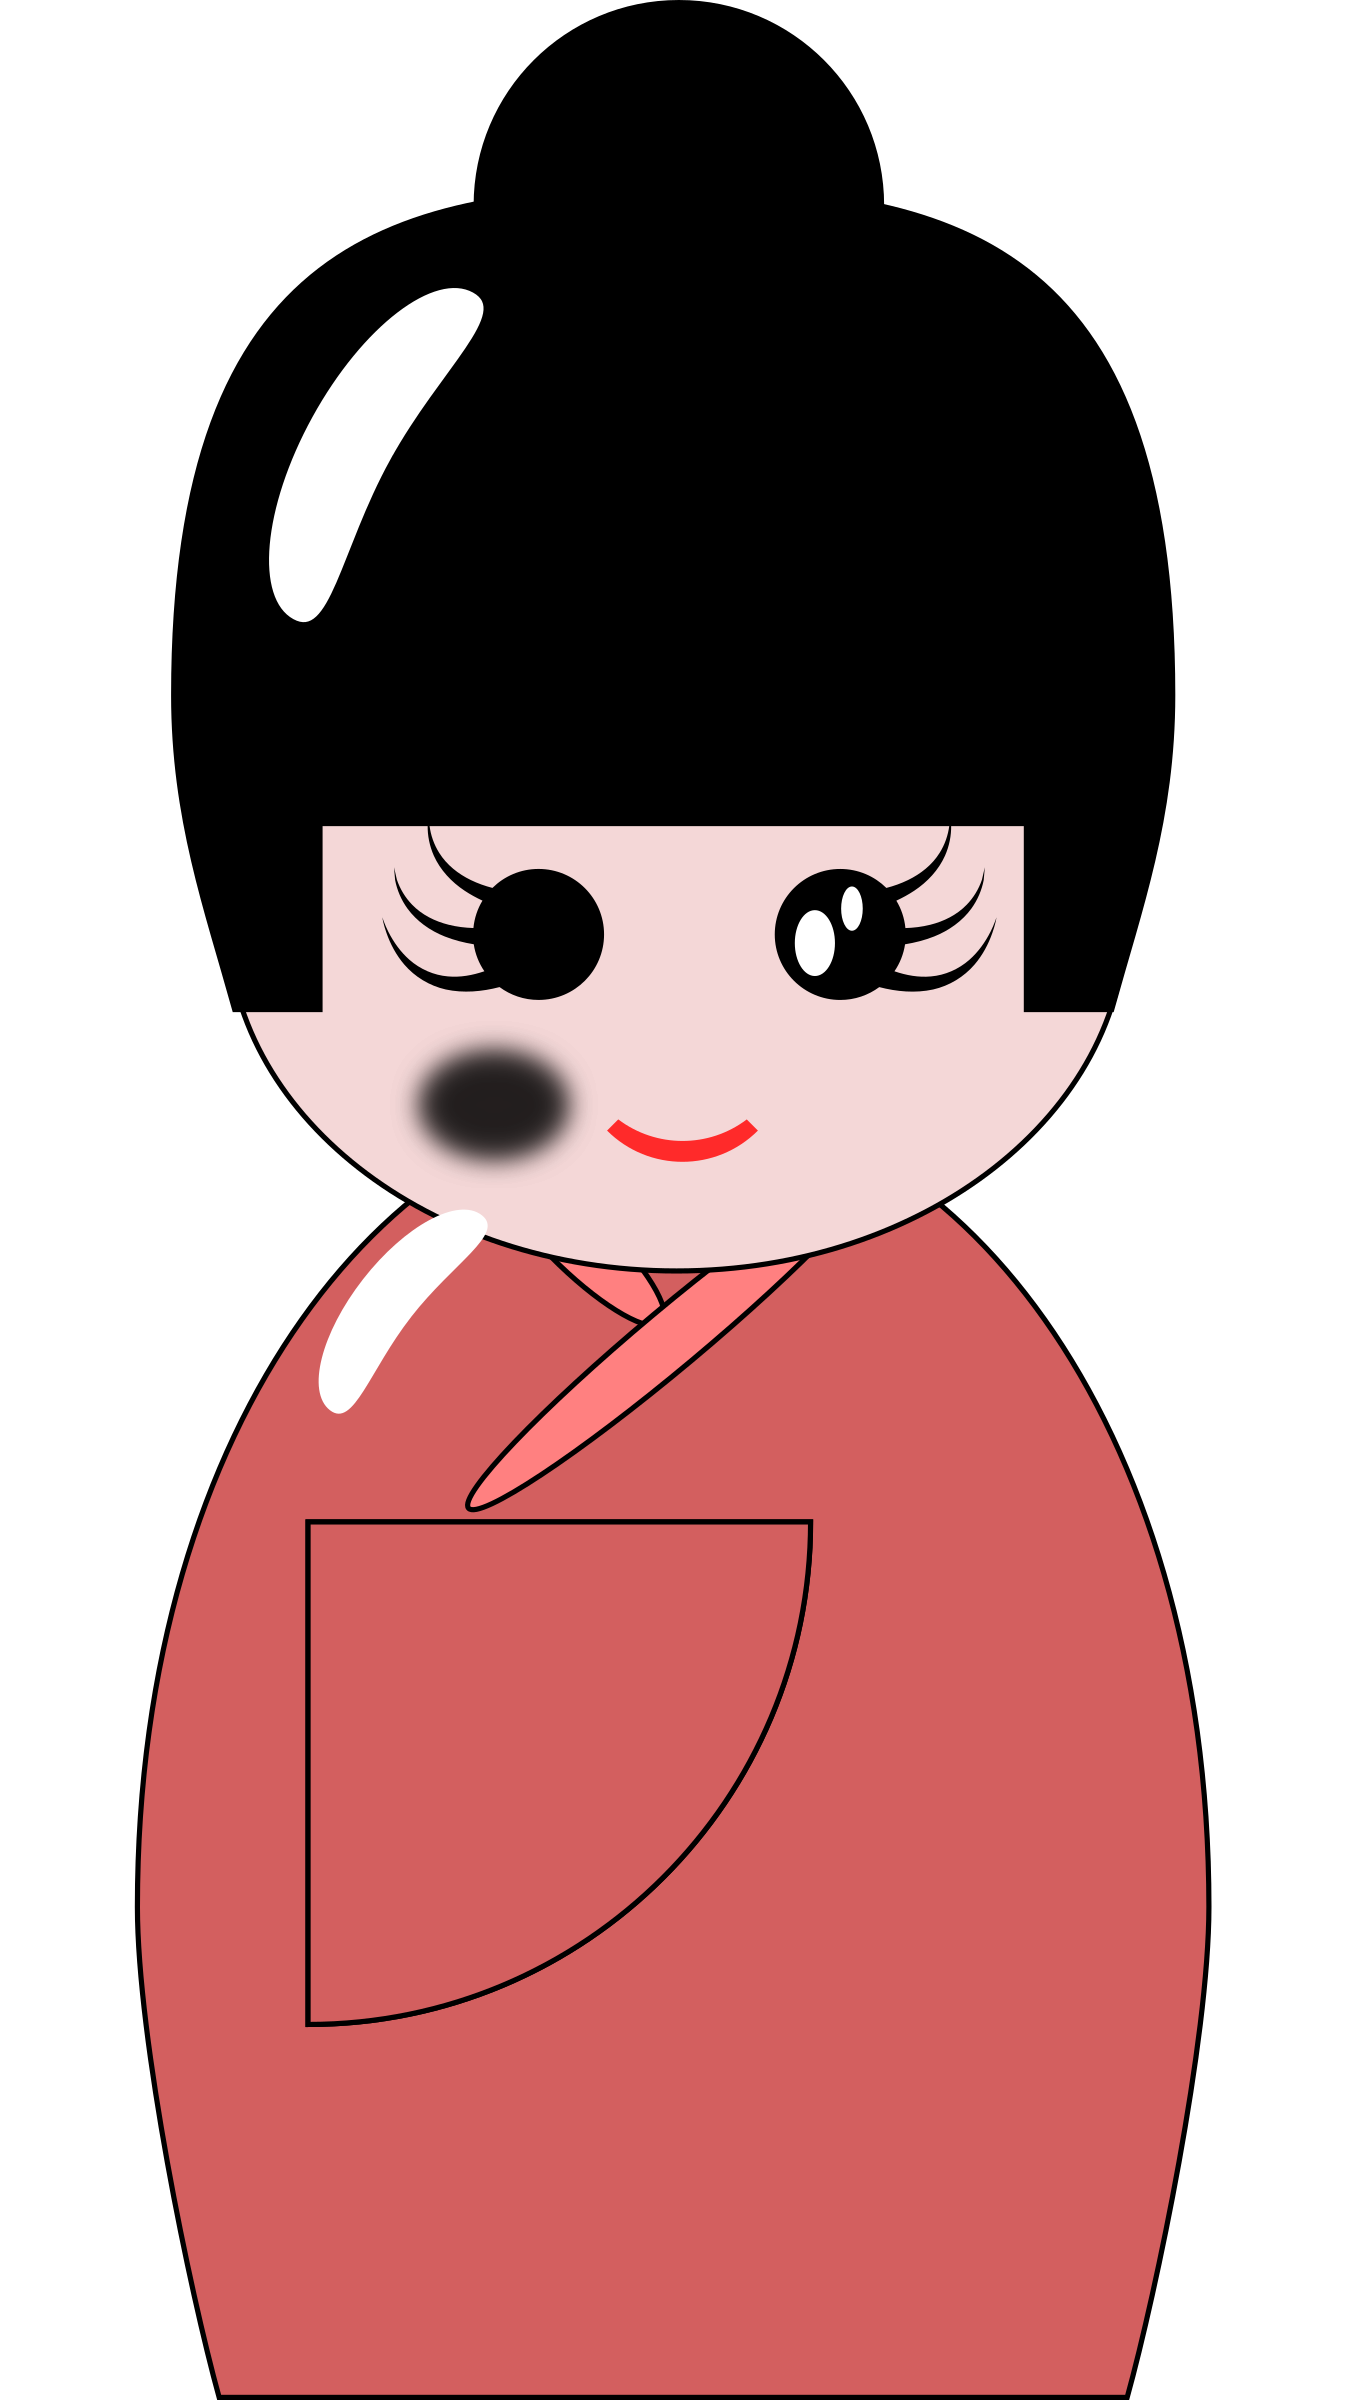 Japanese Doll PNG Background Image